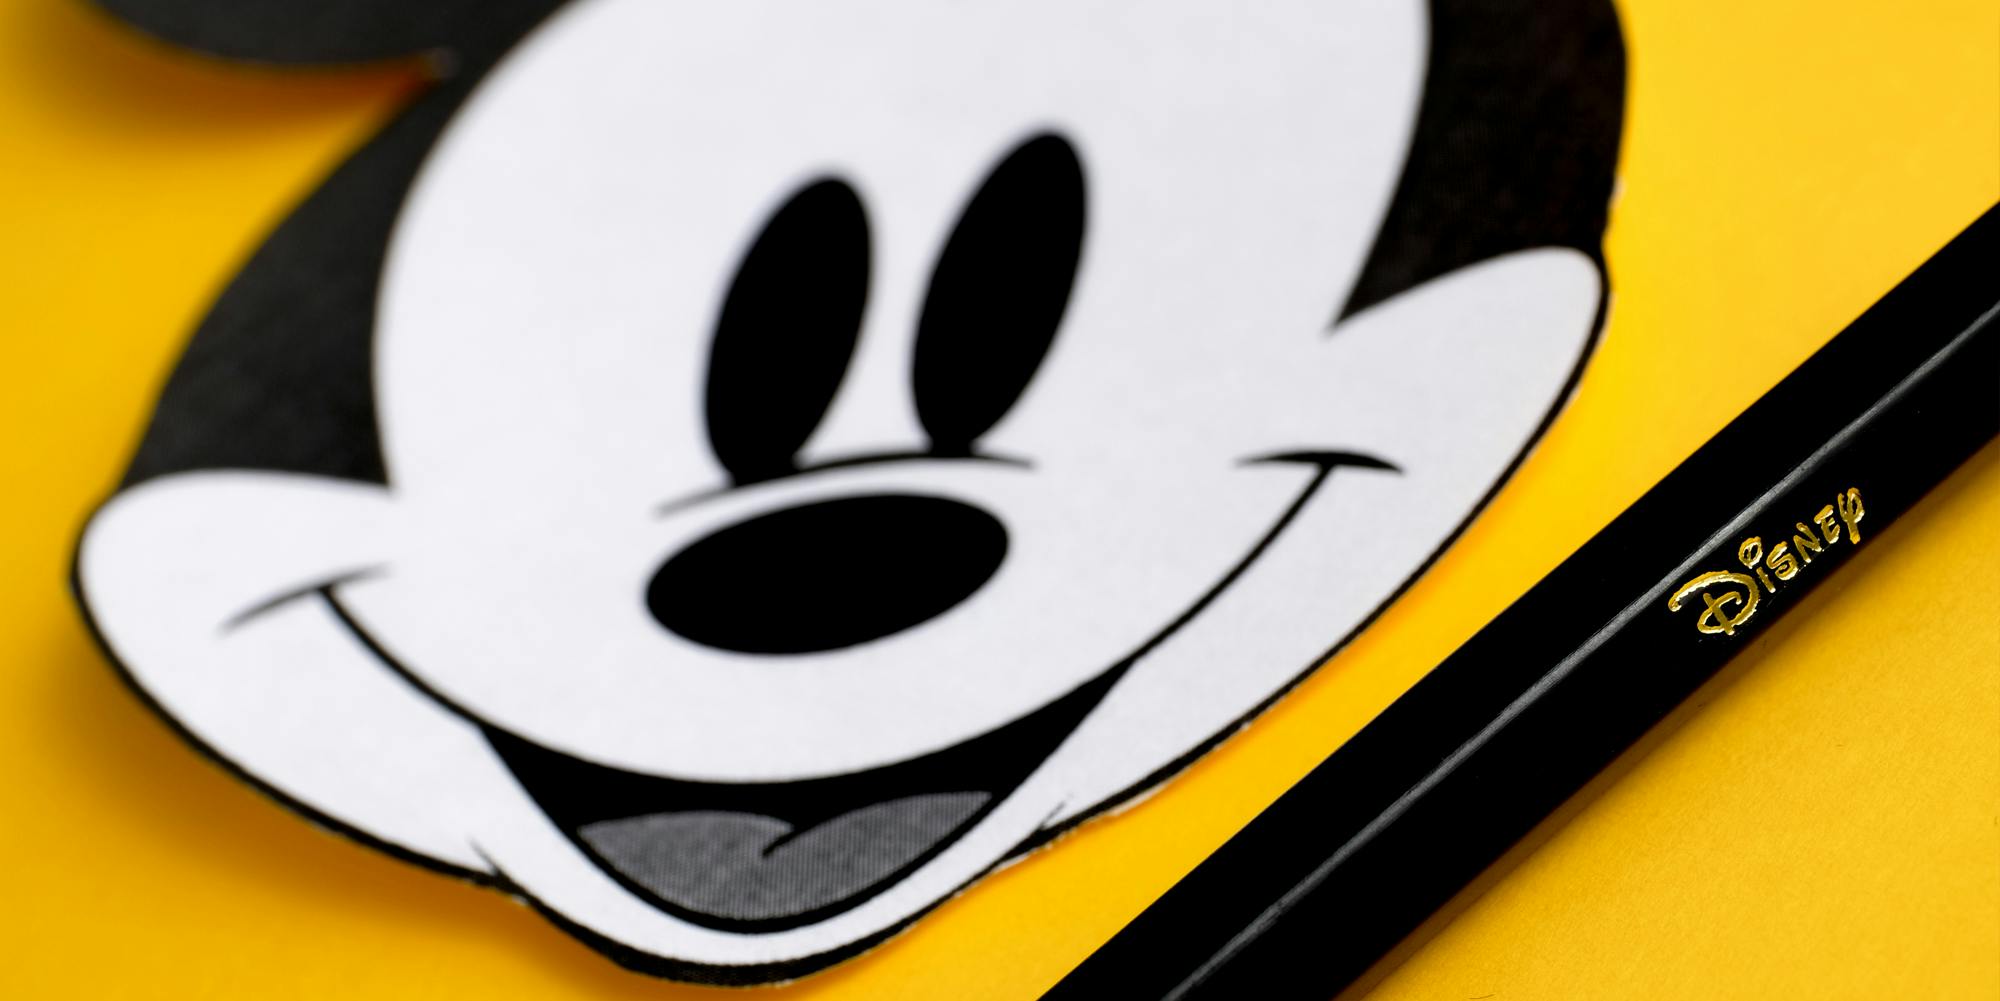 Mickey Mouse cutout drawing on yellow background with Disney pencil